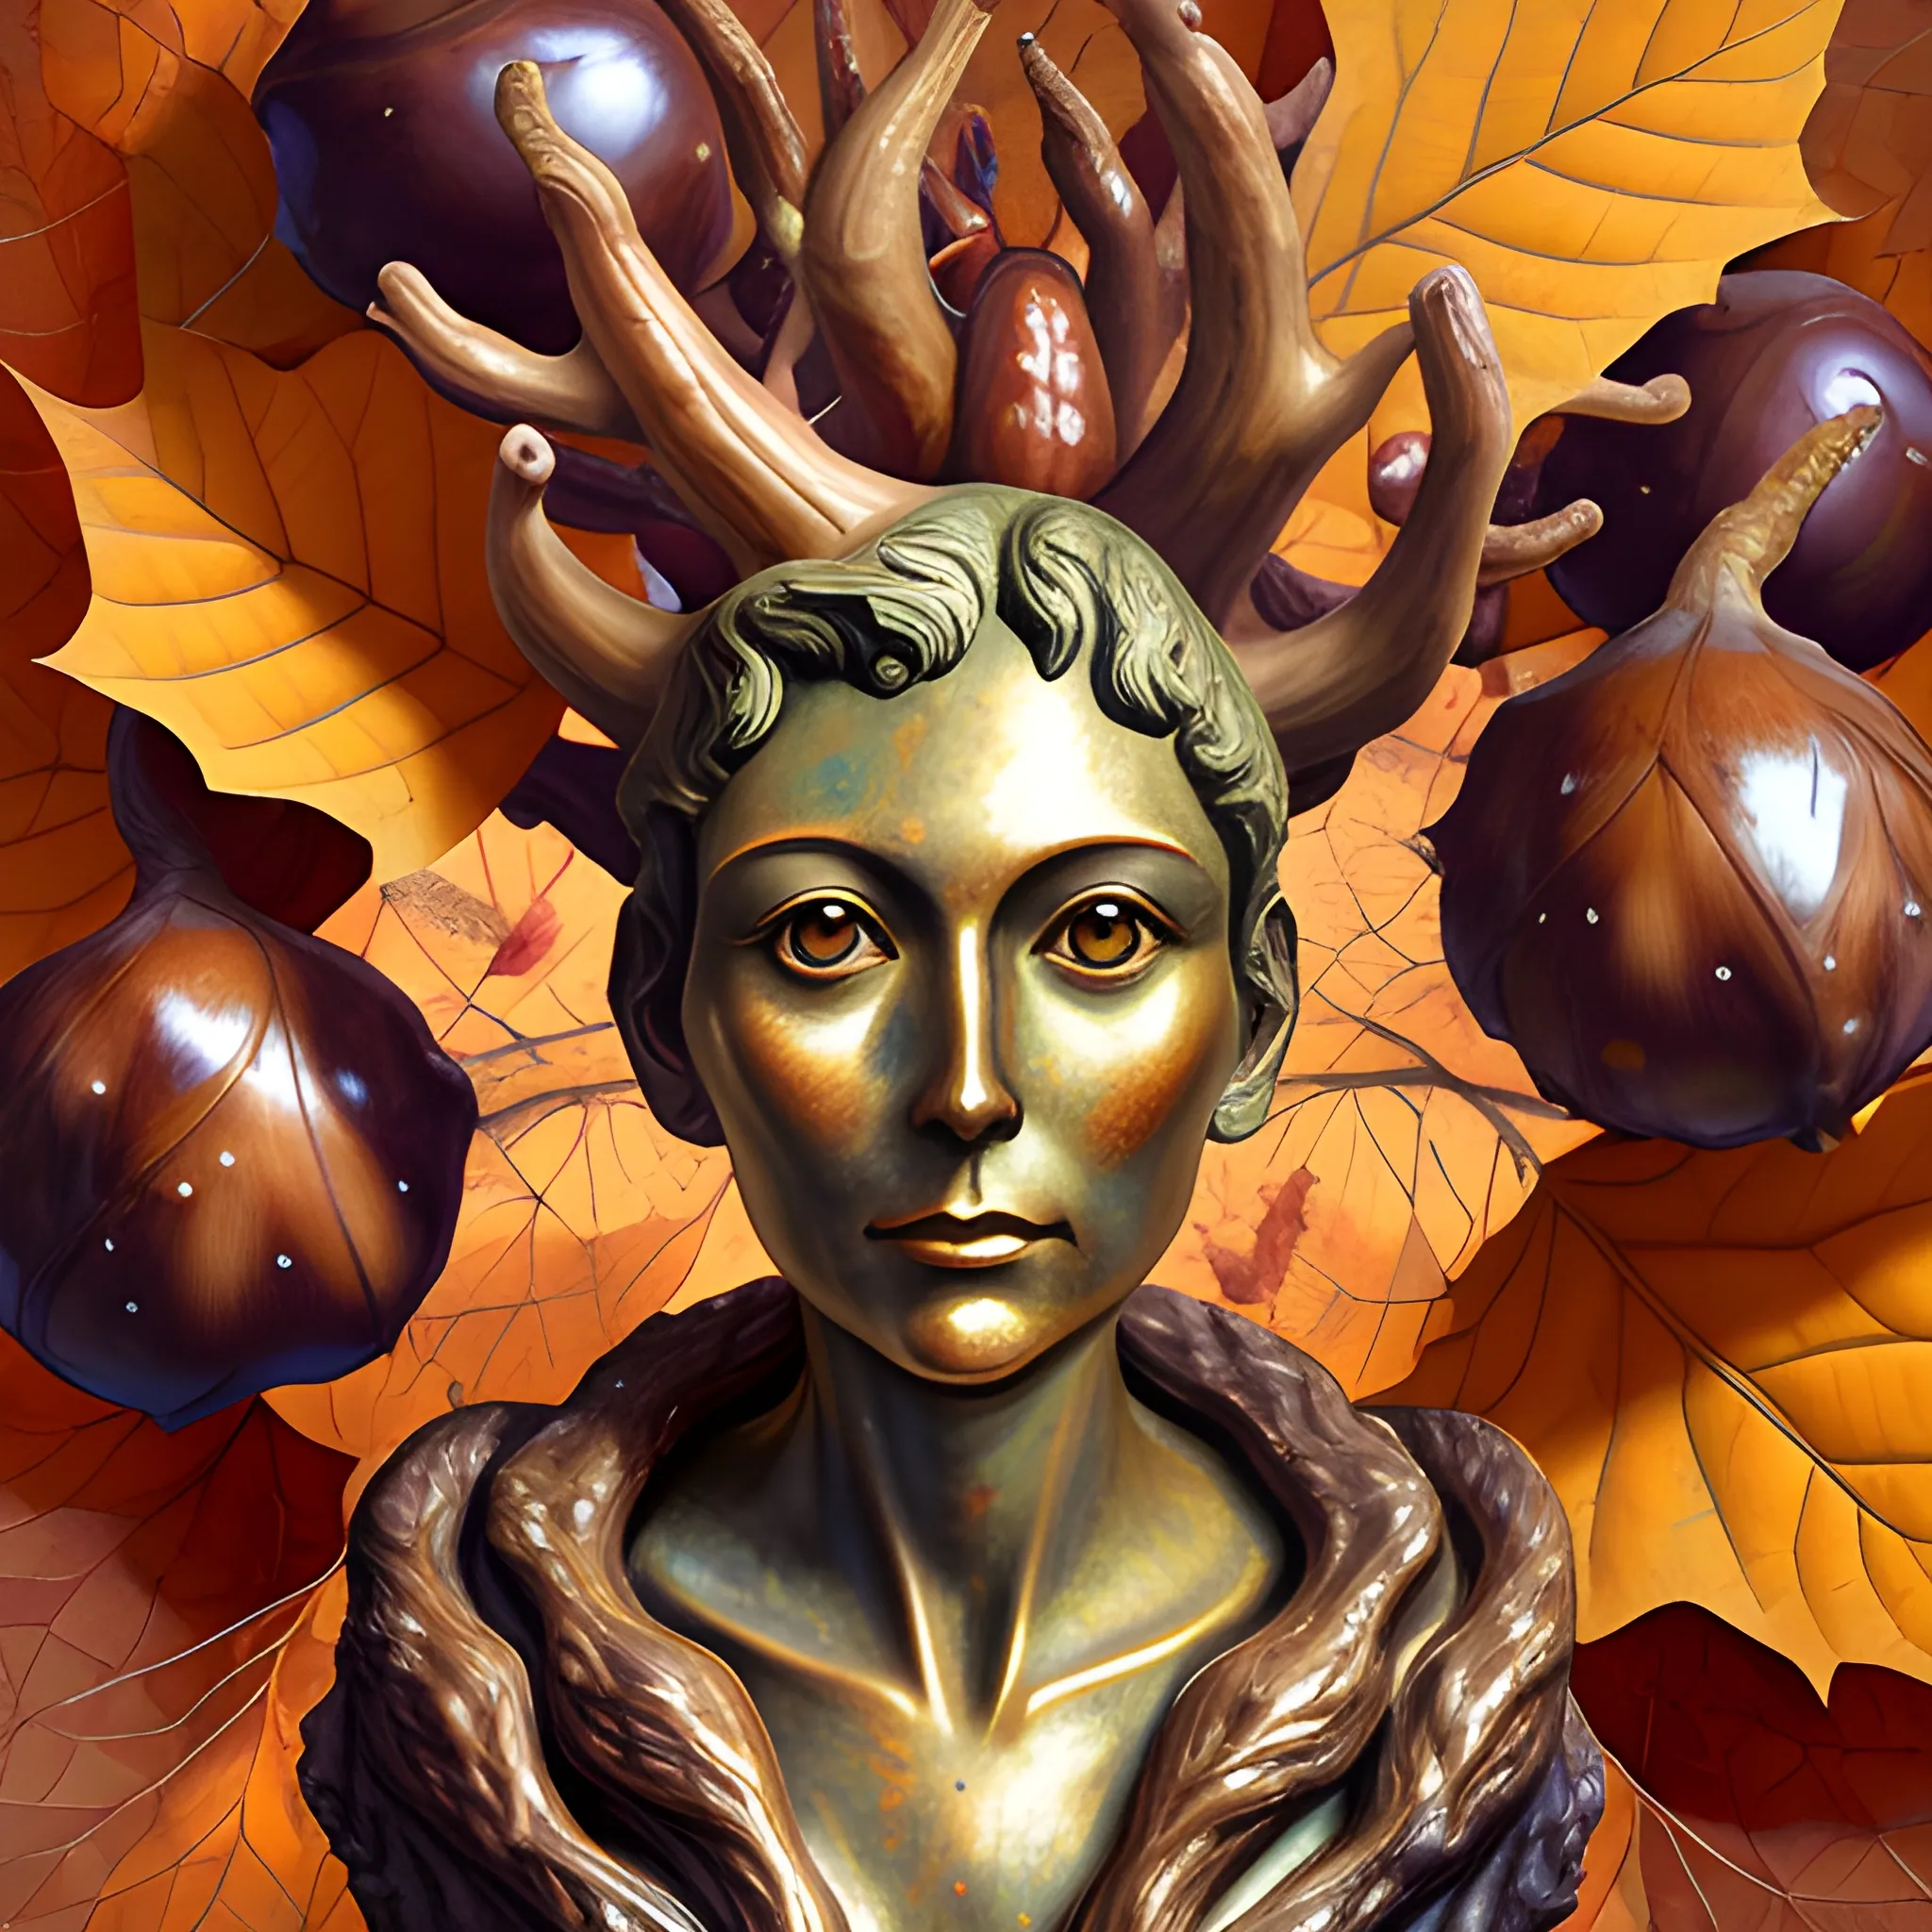  a bronze statue of many crazy chestnuts look like female human face , close up, saturated colors, surrealism, chaotic background many chestnuts and chestnut leaves floating around  3D, Trippy, eerie atmosphere, close up, illustration, angular perspective, Oil Painting, Water Color